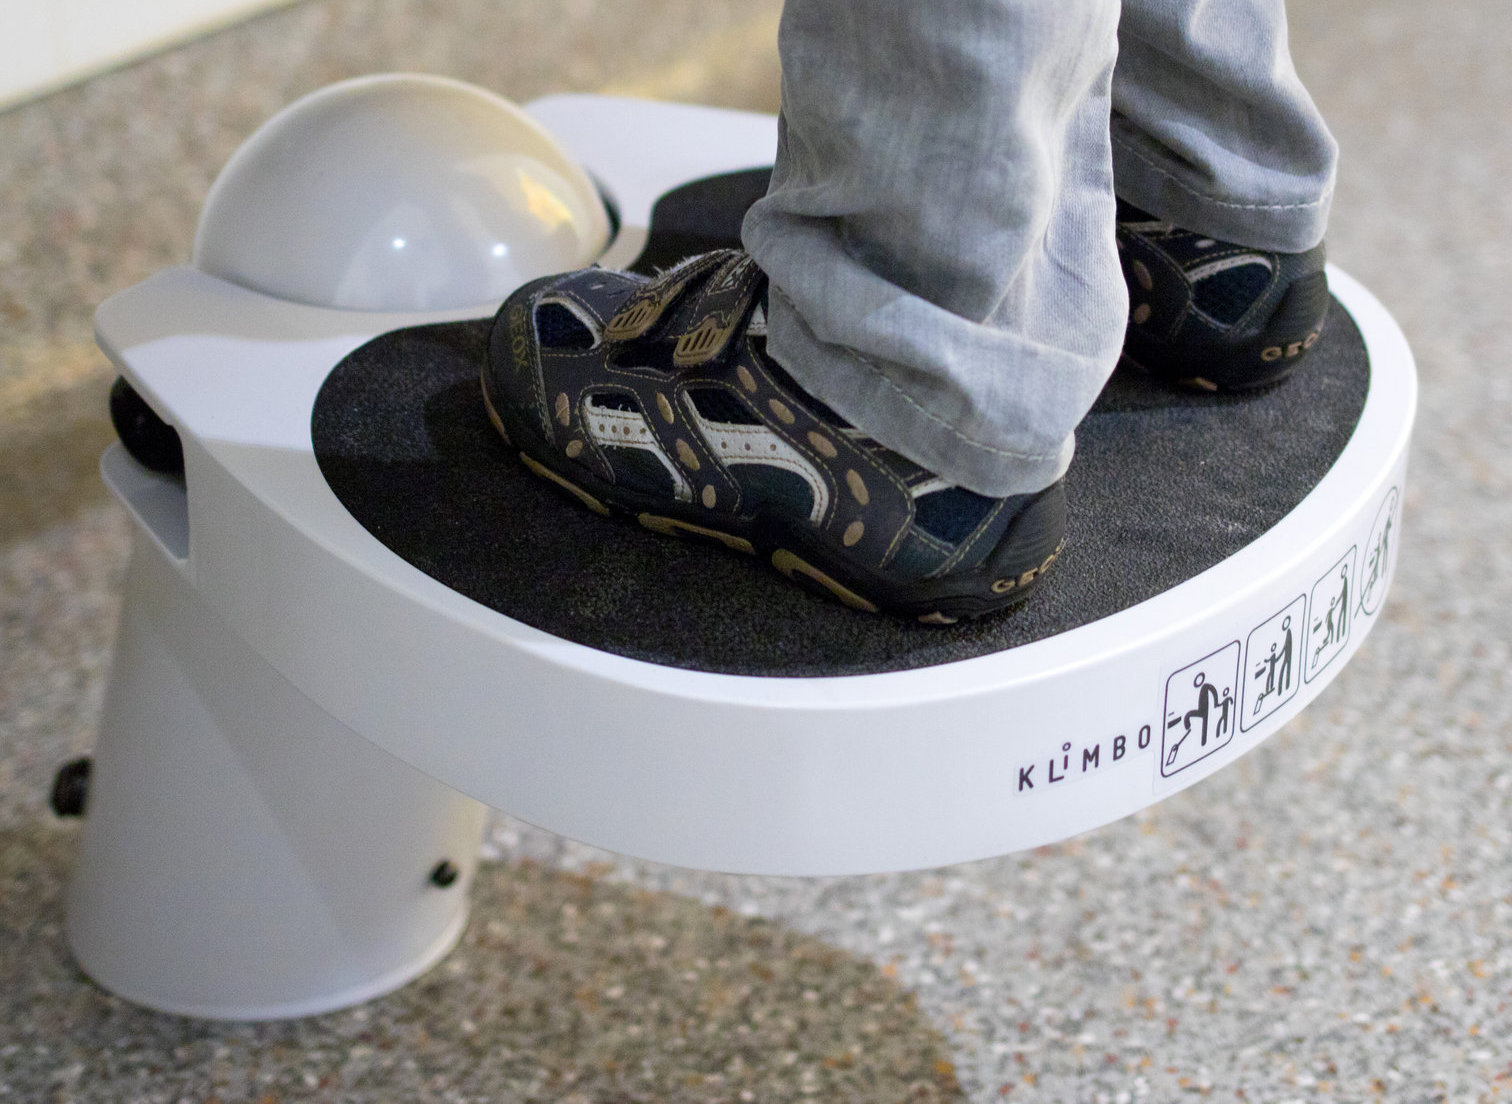 Introducing: Klimbo the Retractable Step for Children